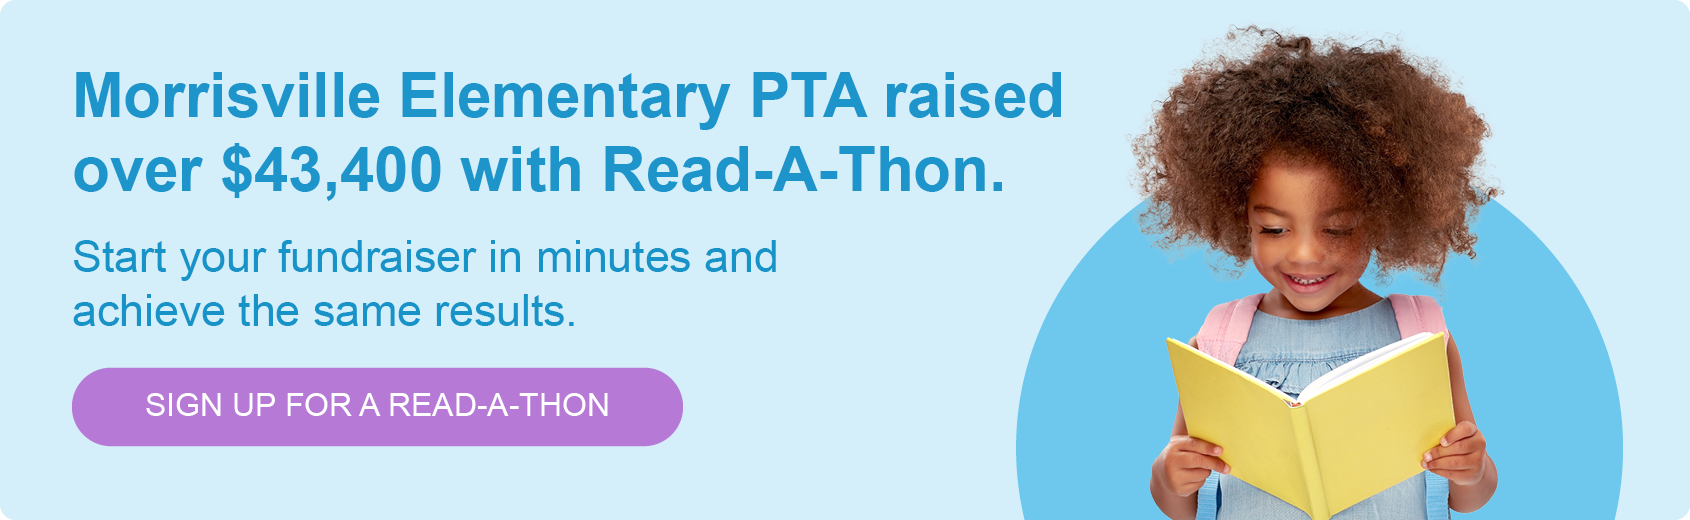 Sign up for a free Read-A-Thon fundraiser to launch your next successful school PTA fundraiser and meet your fundraising goals.